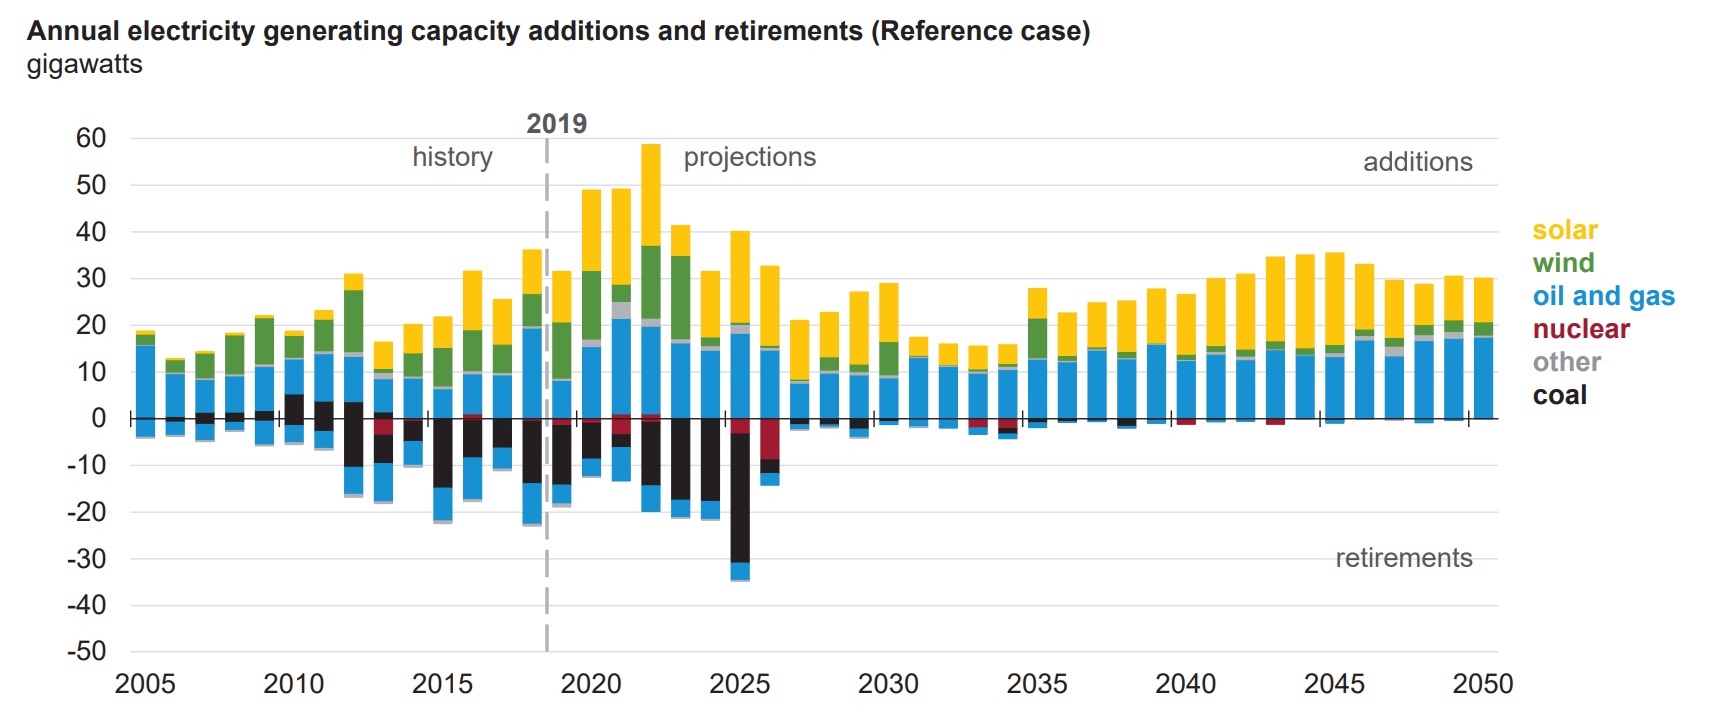 US annual electricity generating capacity additions and retirements